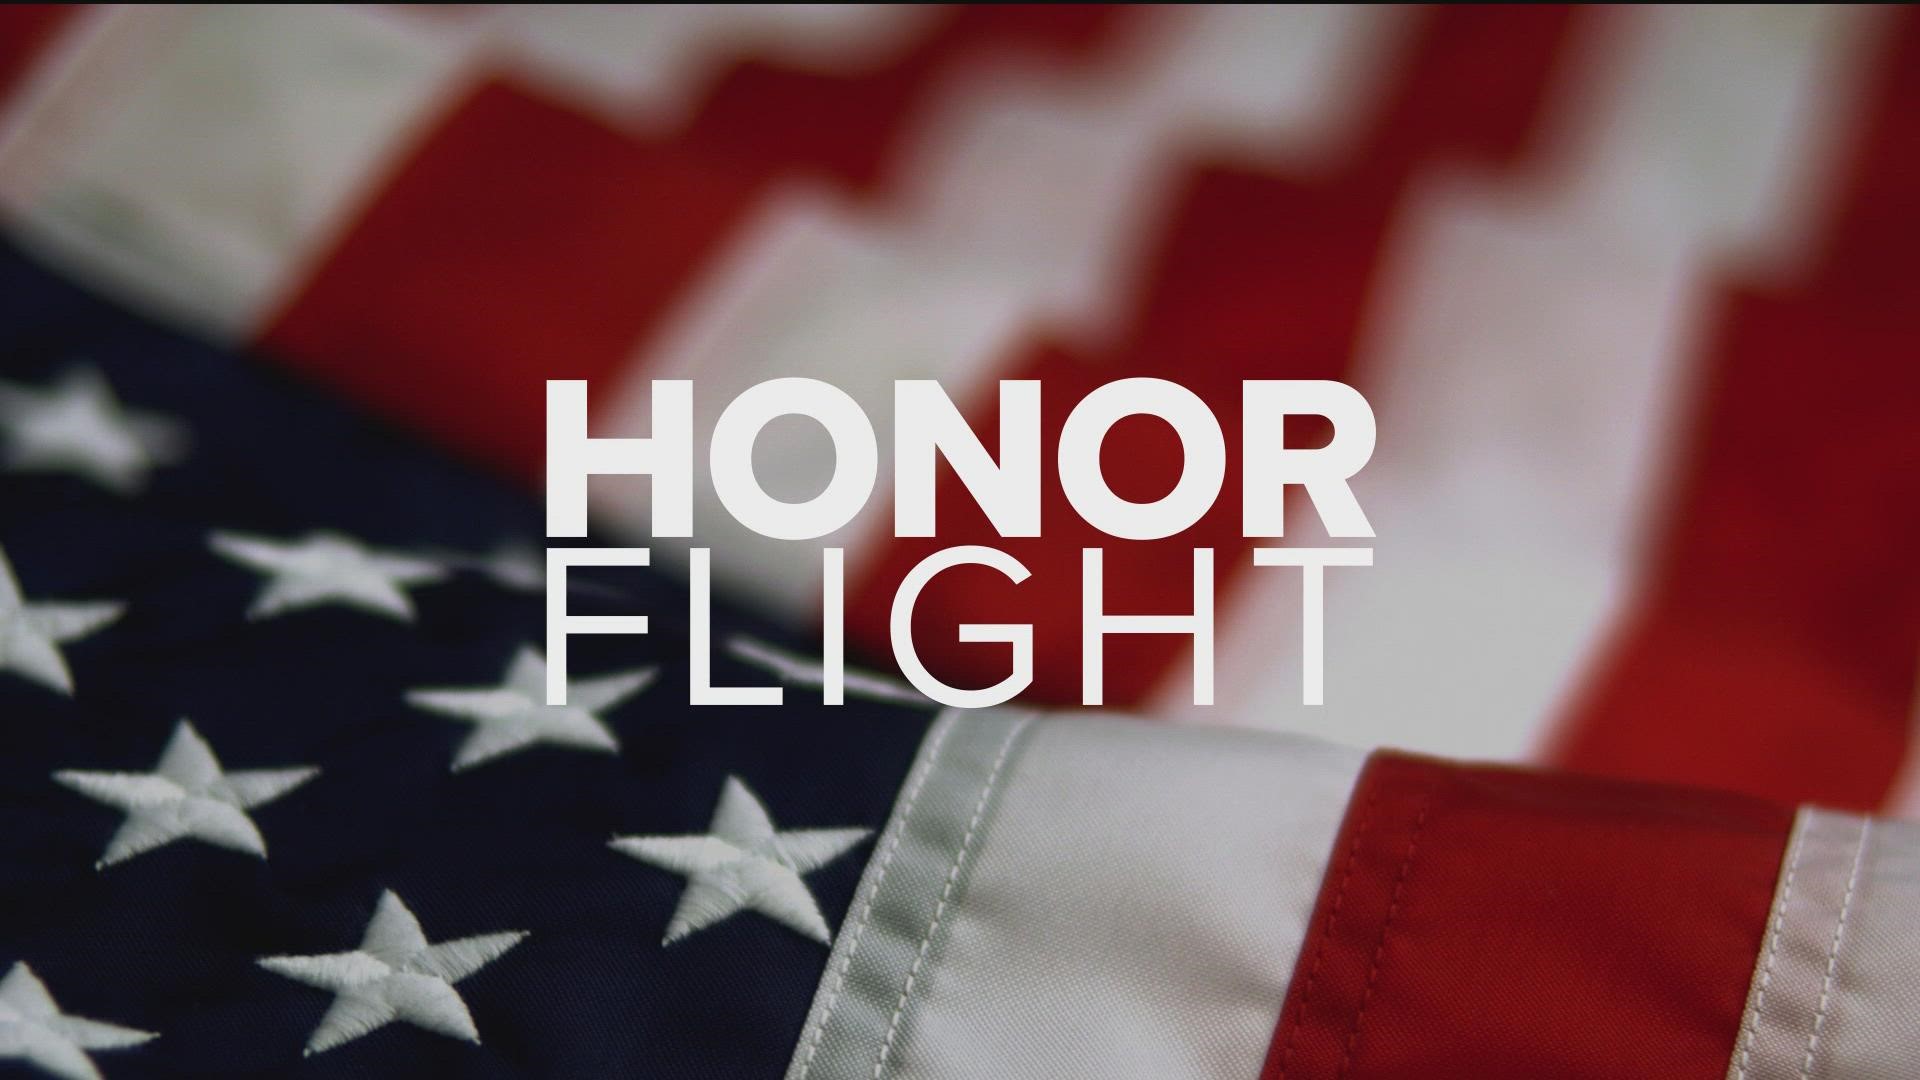 We value the service and commitment of those who put on the uniform and share their powerful moments when they traveled on Honor Flight San Diego.